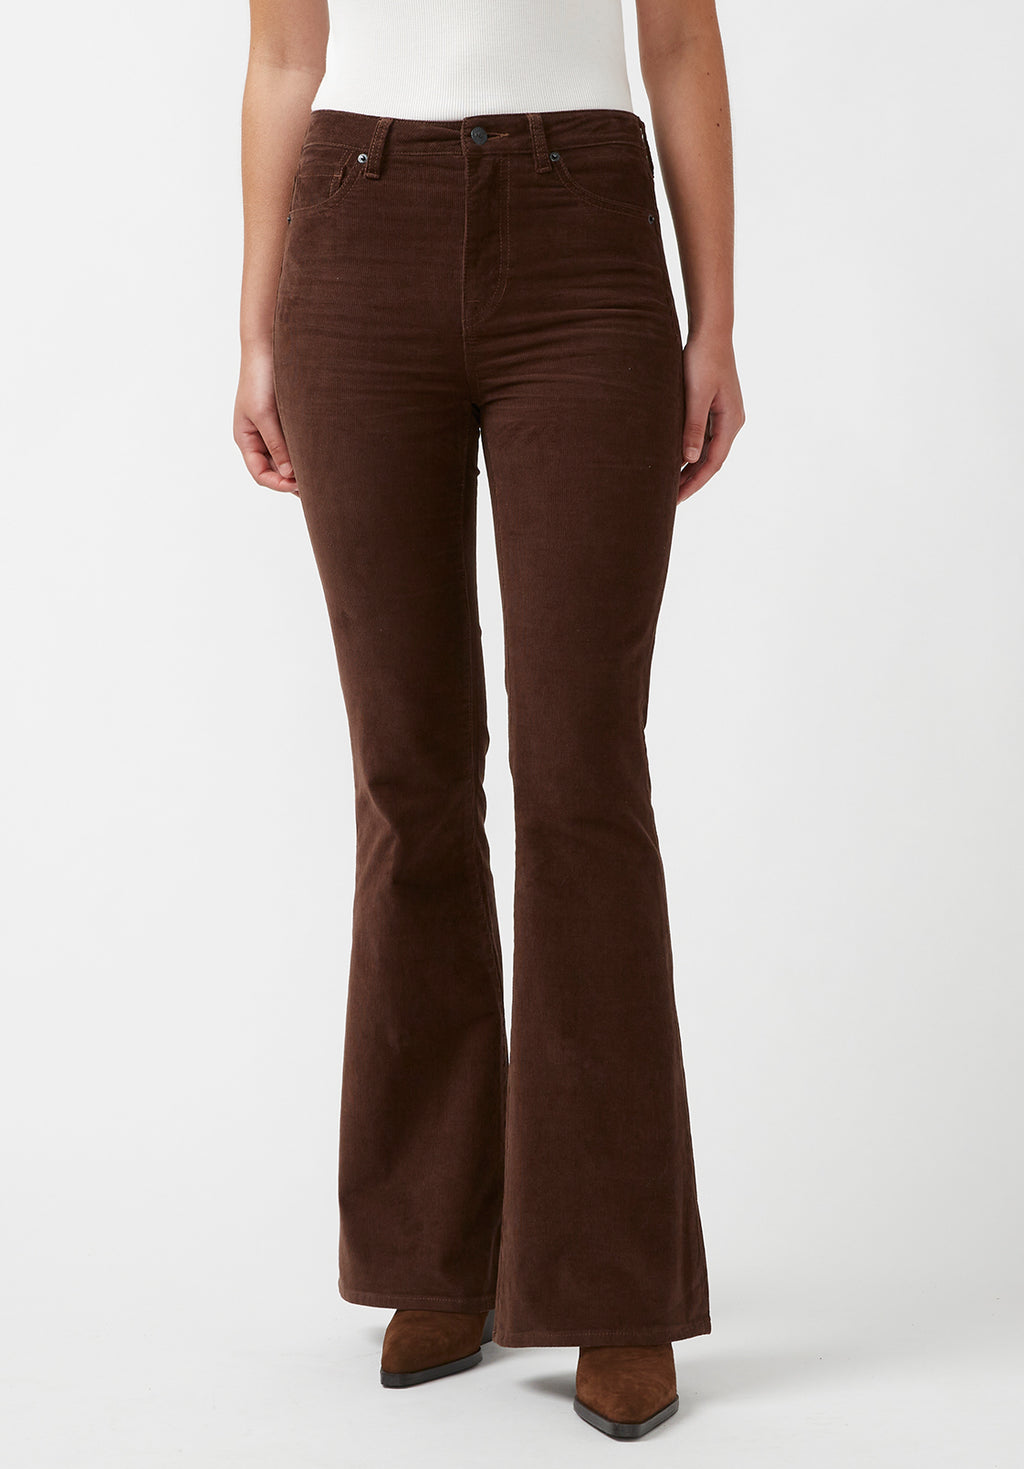 it's all FLARE #corduroy #flare #pants It's easy to combine anyting with  these Tan Corduroy Flare Pants 😍…